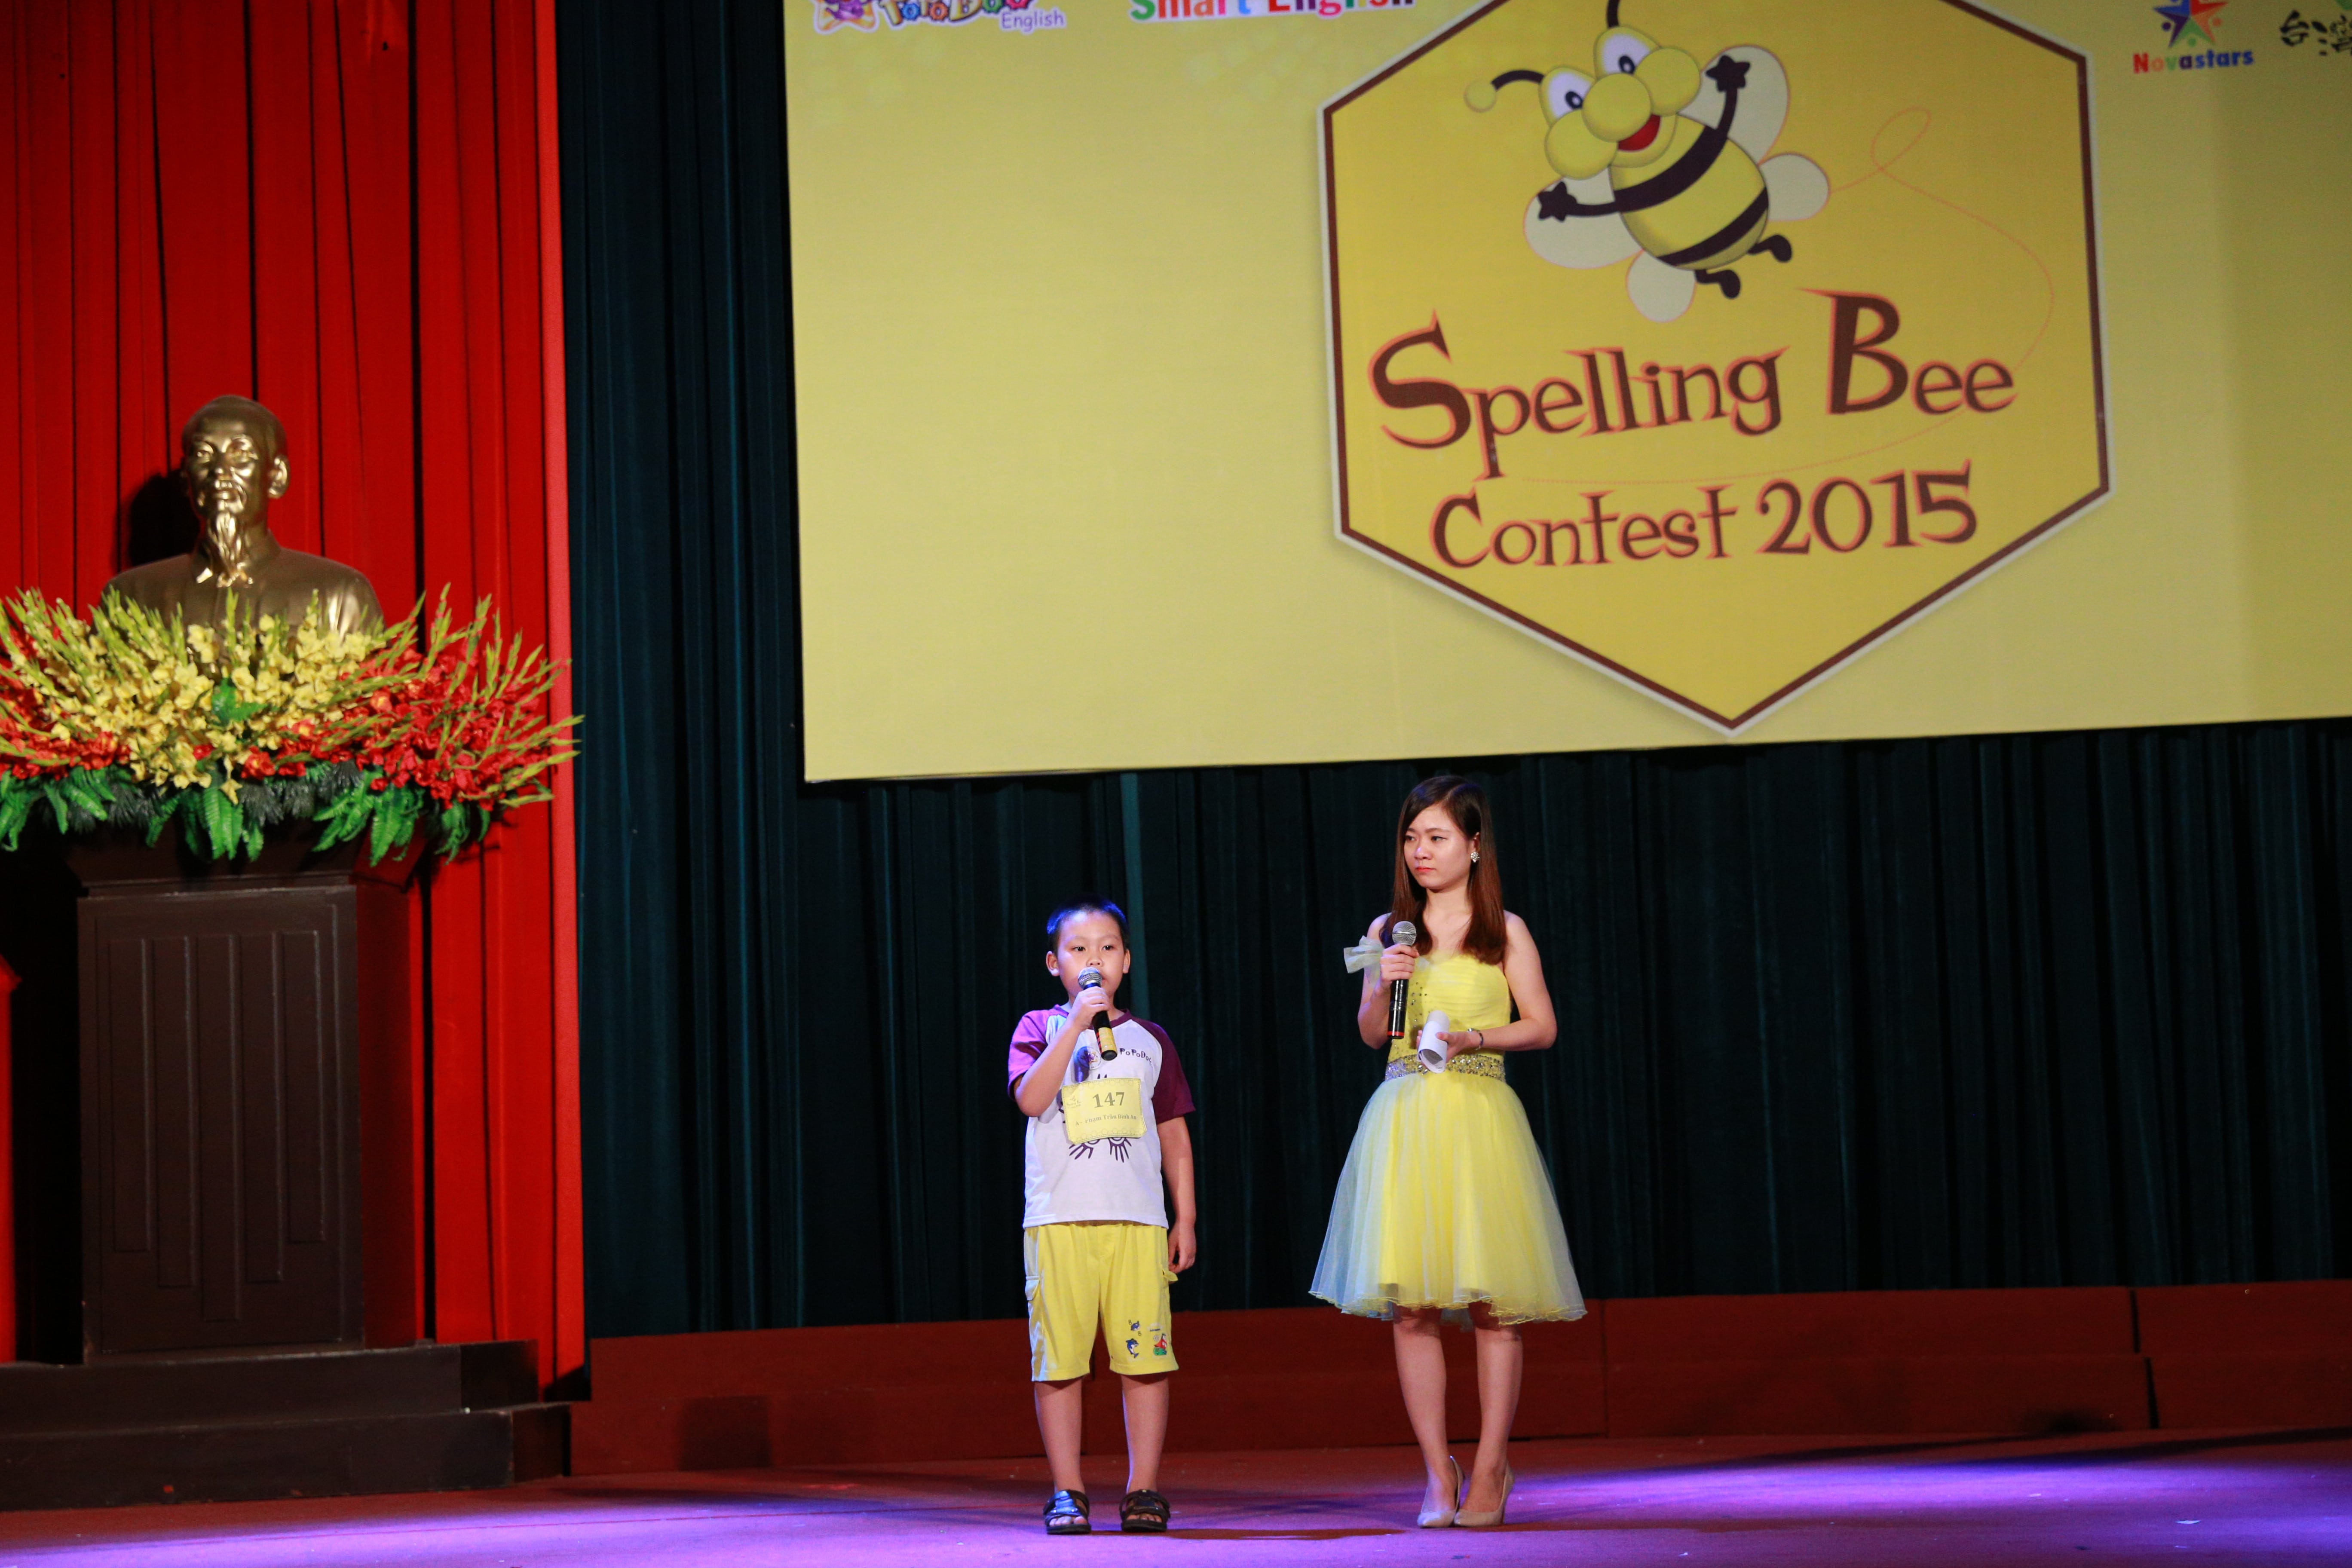 Throwback our Spelling Bee Contest 2015 Champions - Level A